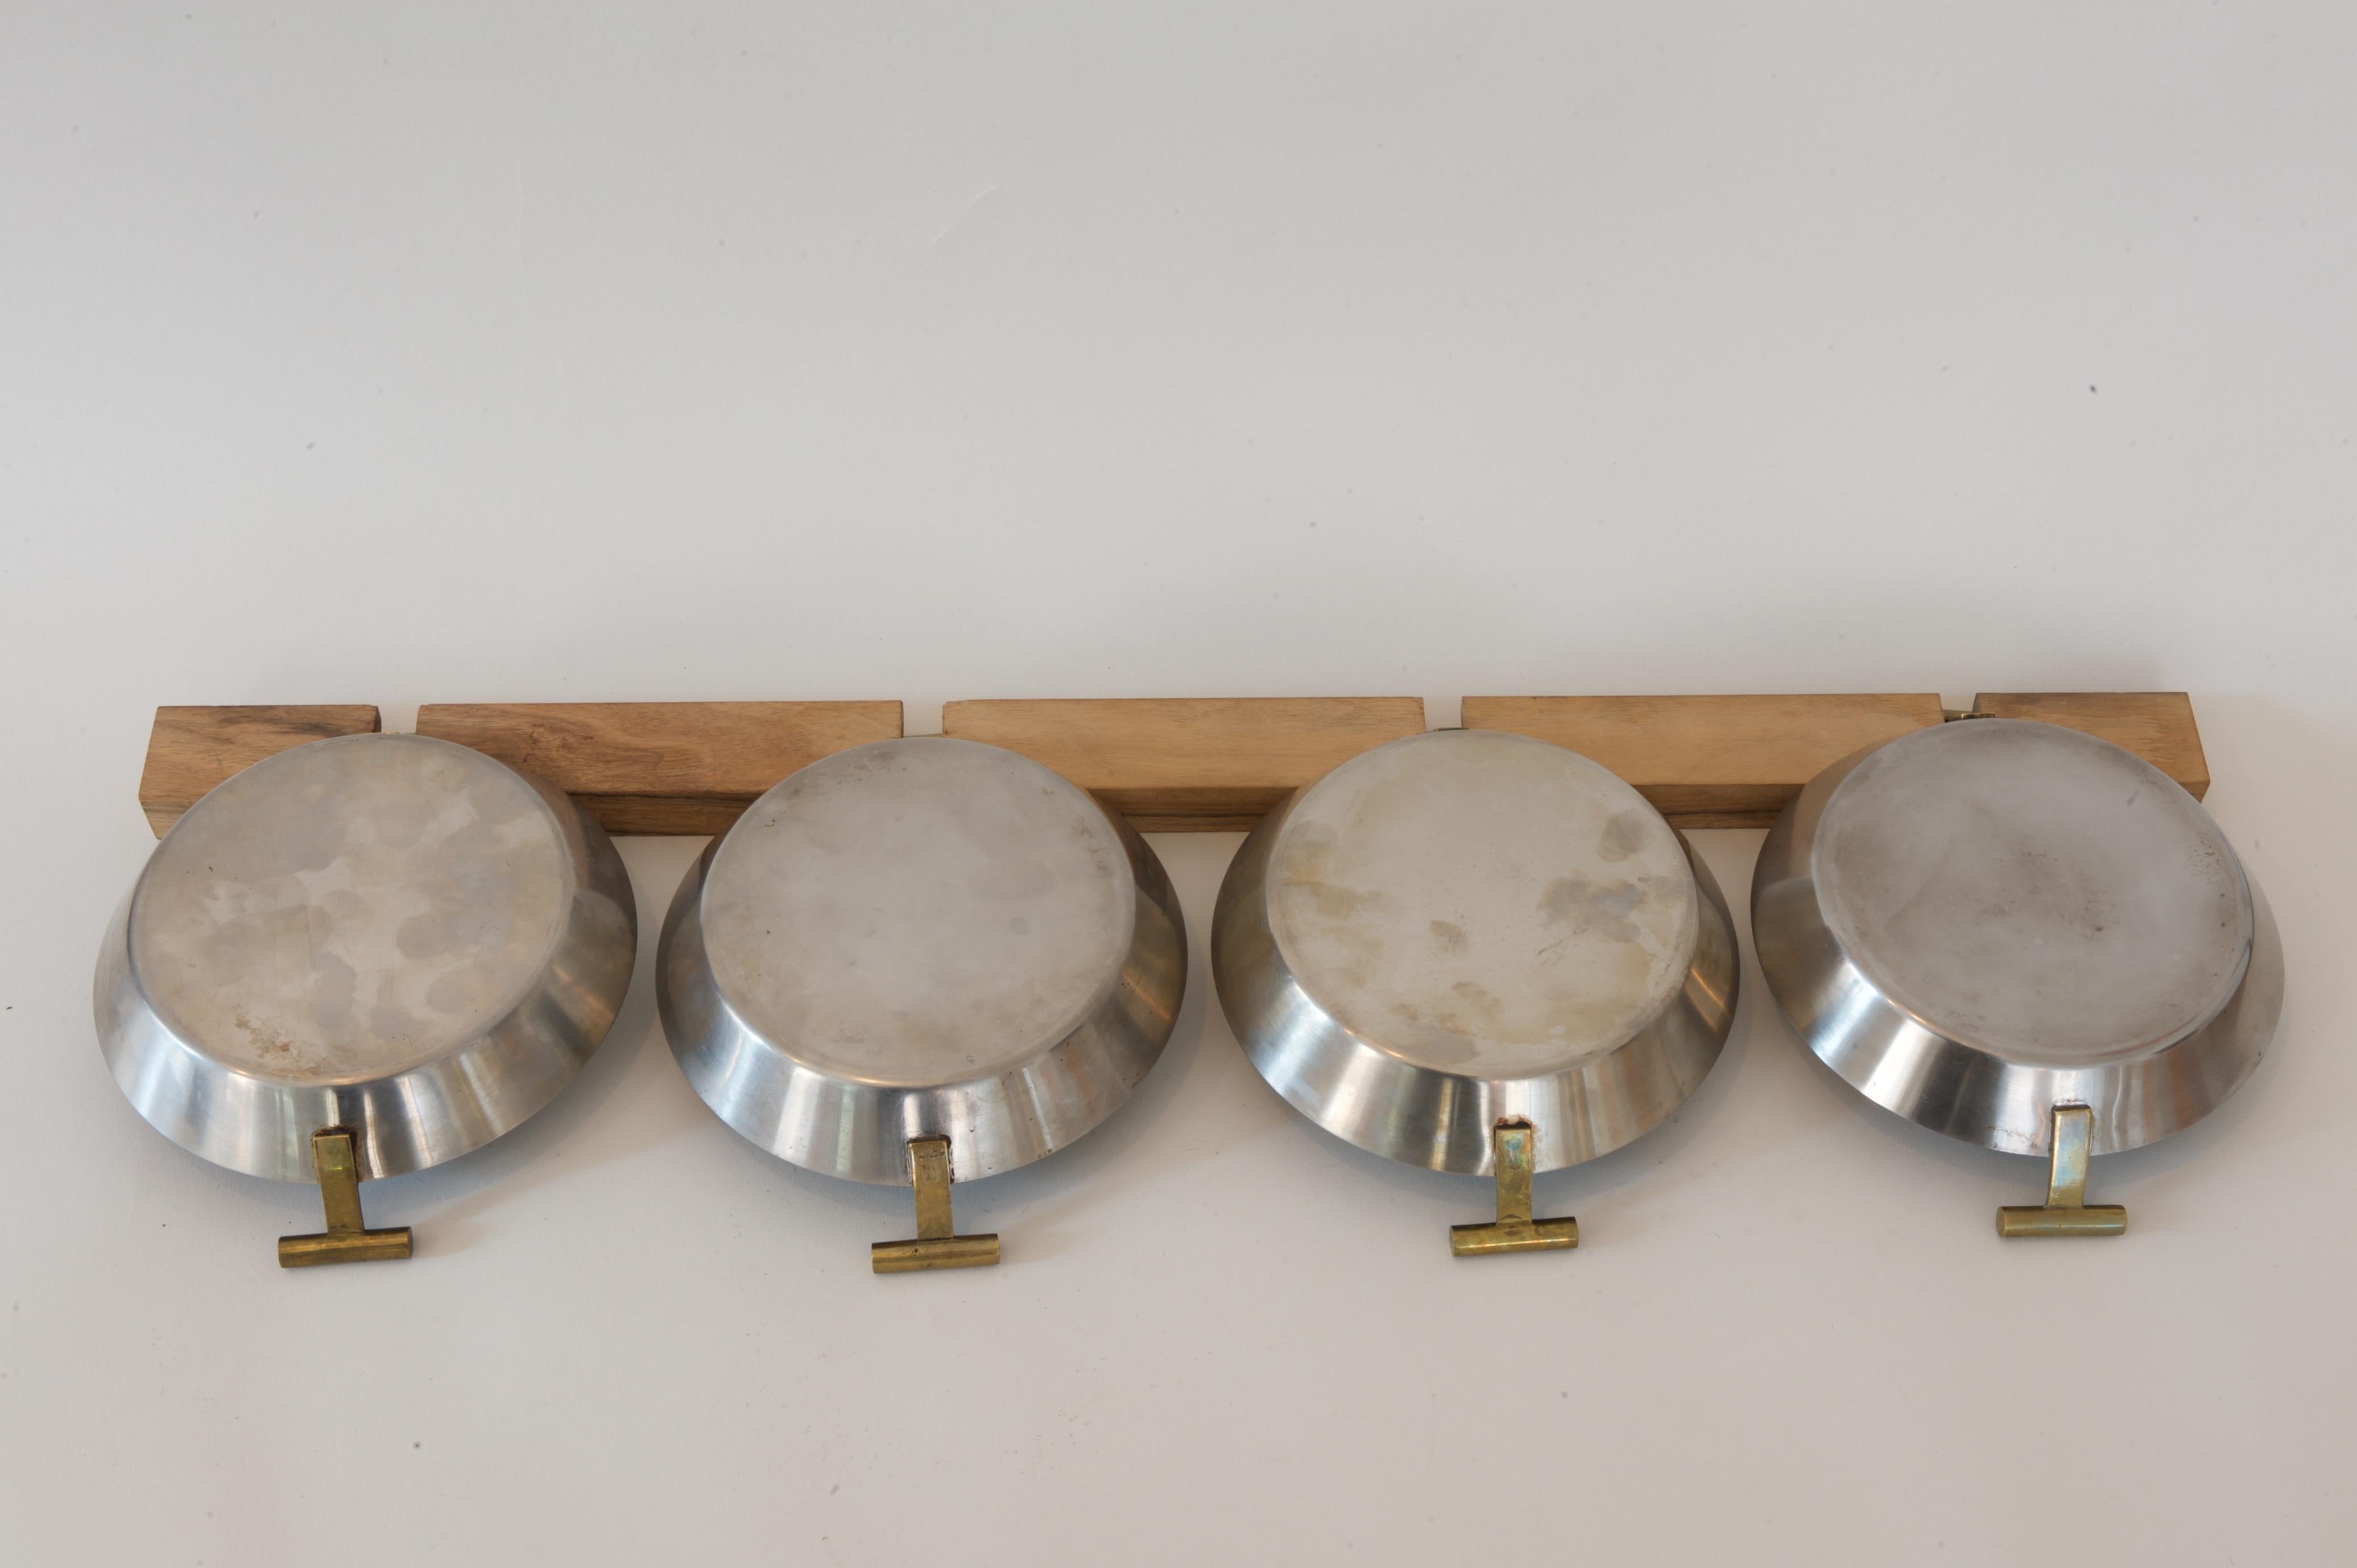 A set of 4 small Pans with a wooden rack
1950s by Carl Auböck

Nutwood rack, stainless steel, brass handles

Length with rack: 59 cm
Pan: 14.5 x 17.5 cm, H 4.3 cm / 5.7 x 6.89 in, H 1.69 in

Stamped on the brass handles: Auböck Logo, MADE IN